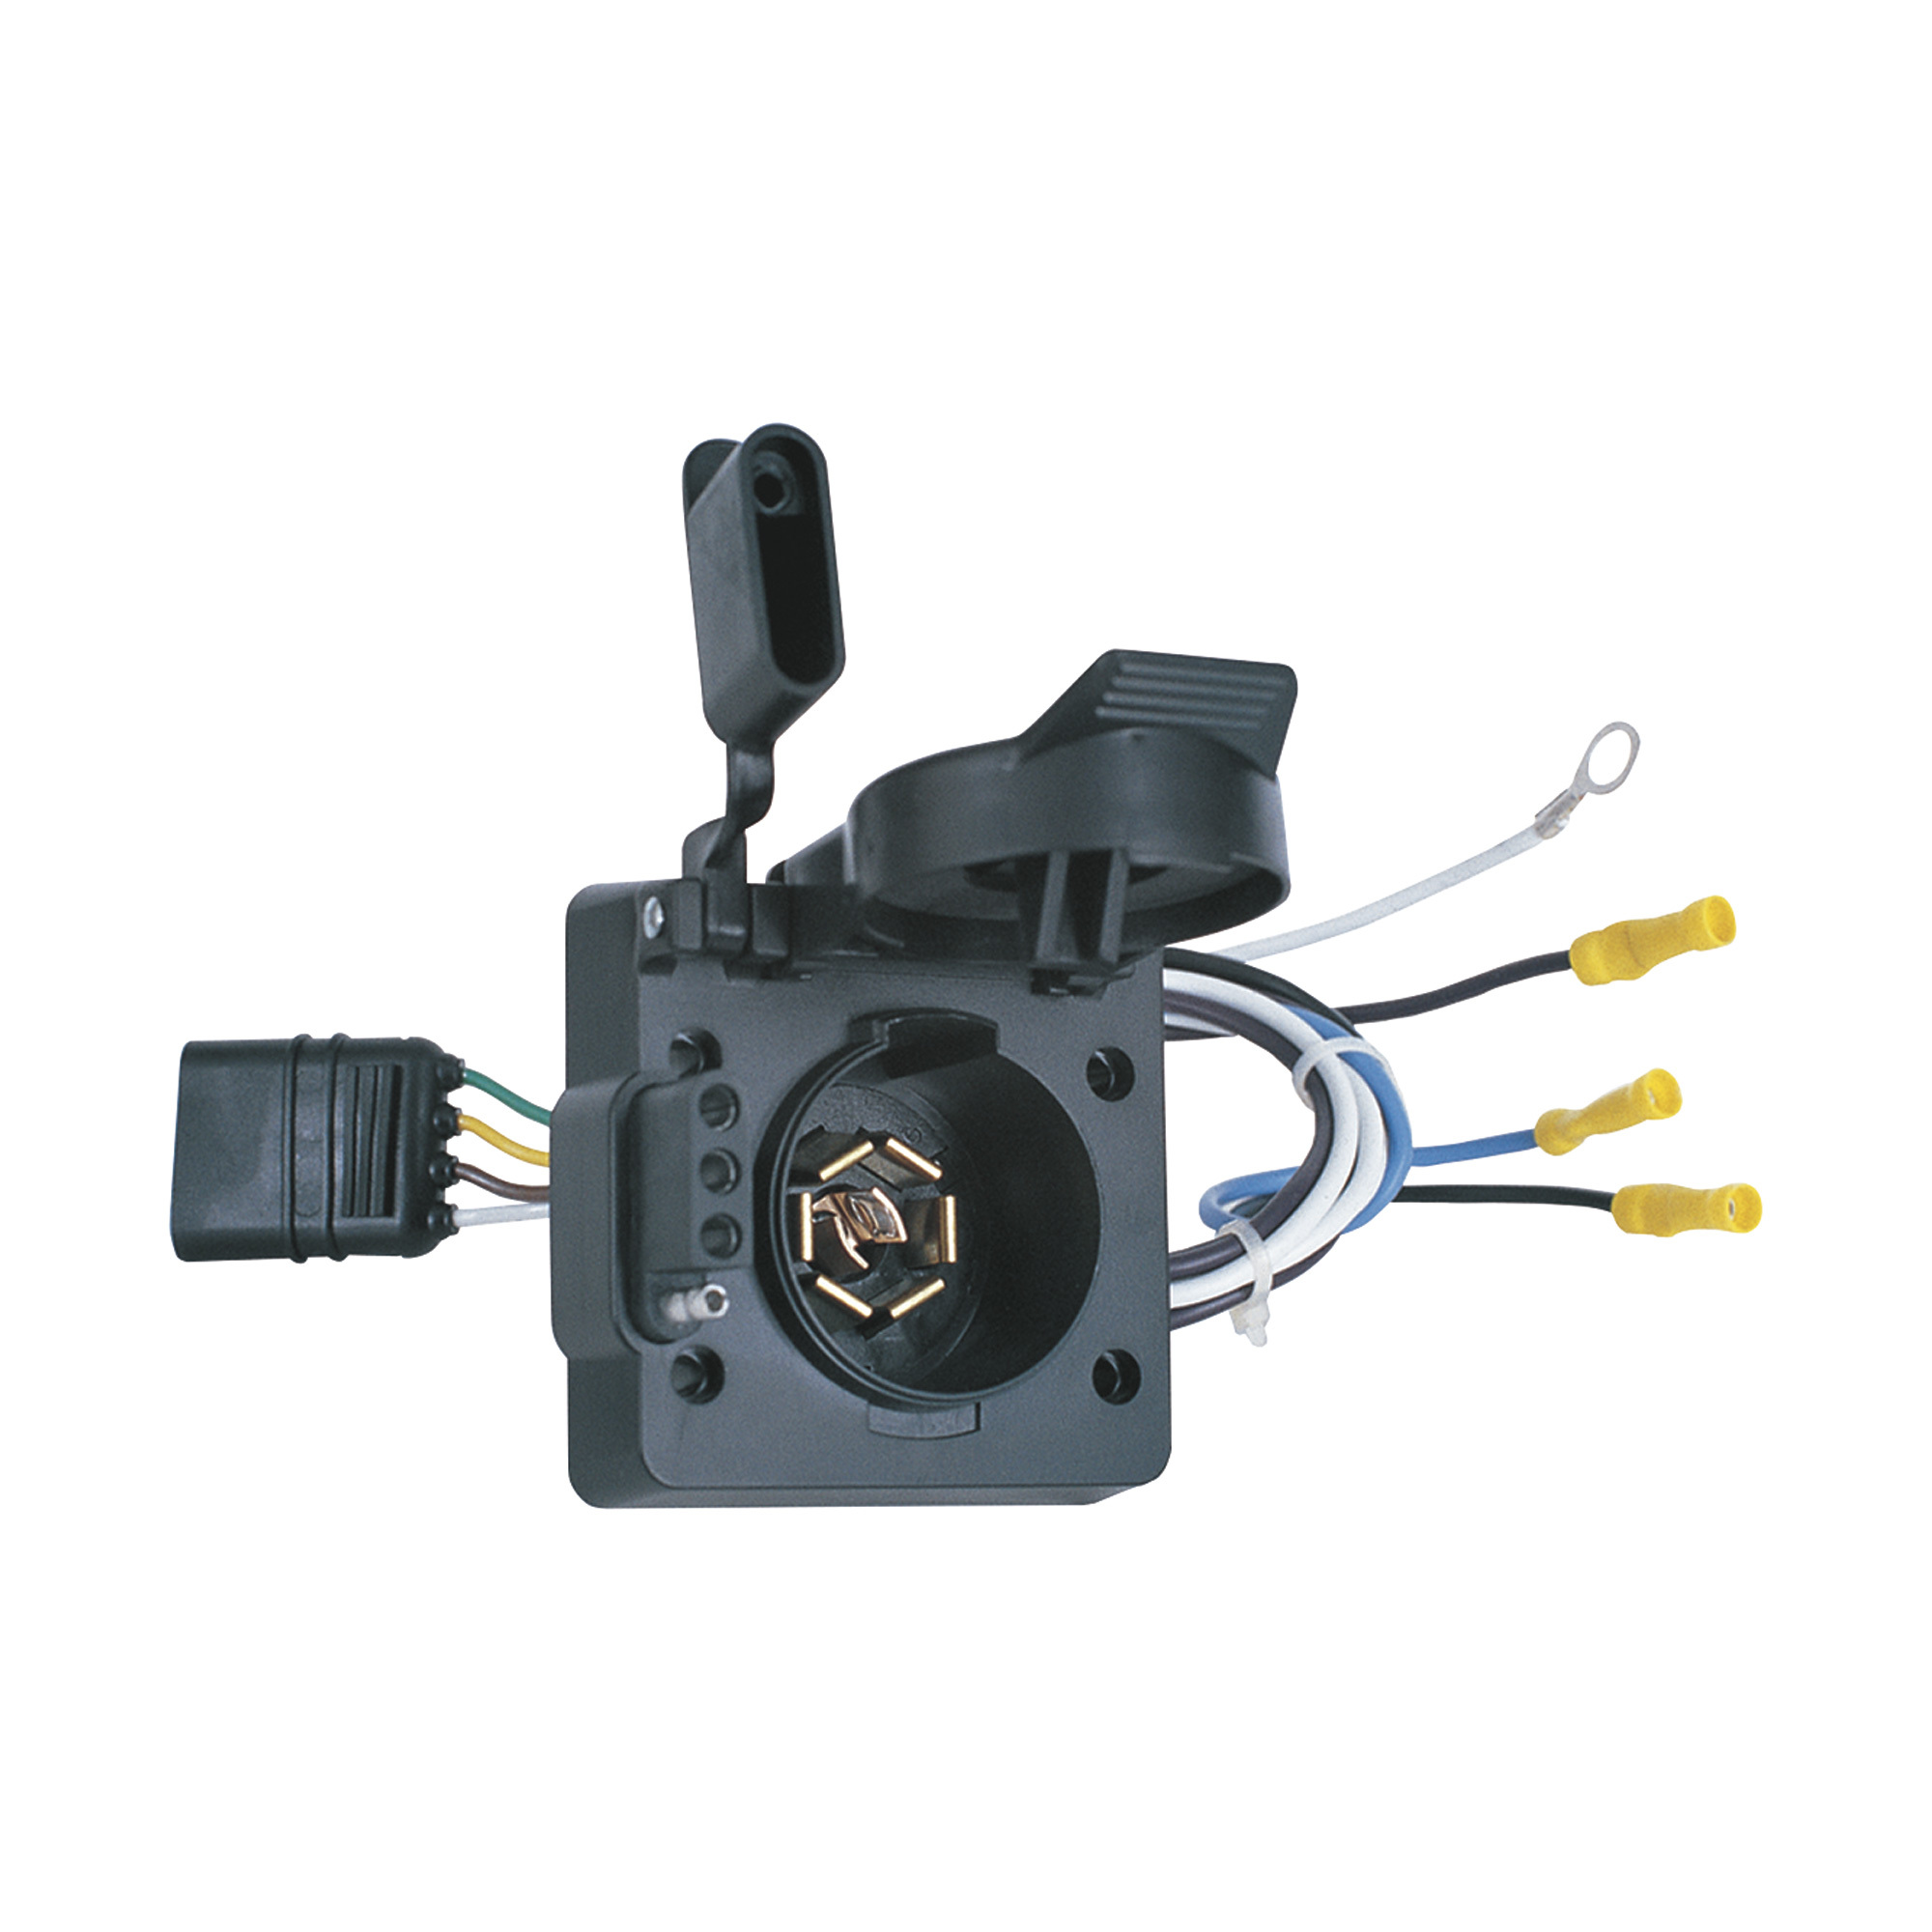 Hopkins Towing Solutions Multi-Tow Trailer Light Wiring Connector â 4 Flat to 7 Blade and 4 Flat, Model 47185